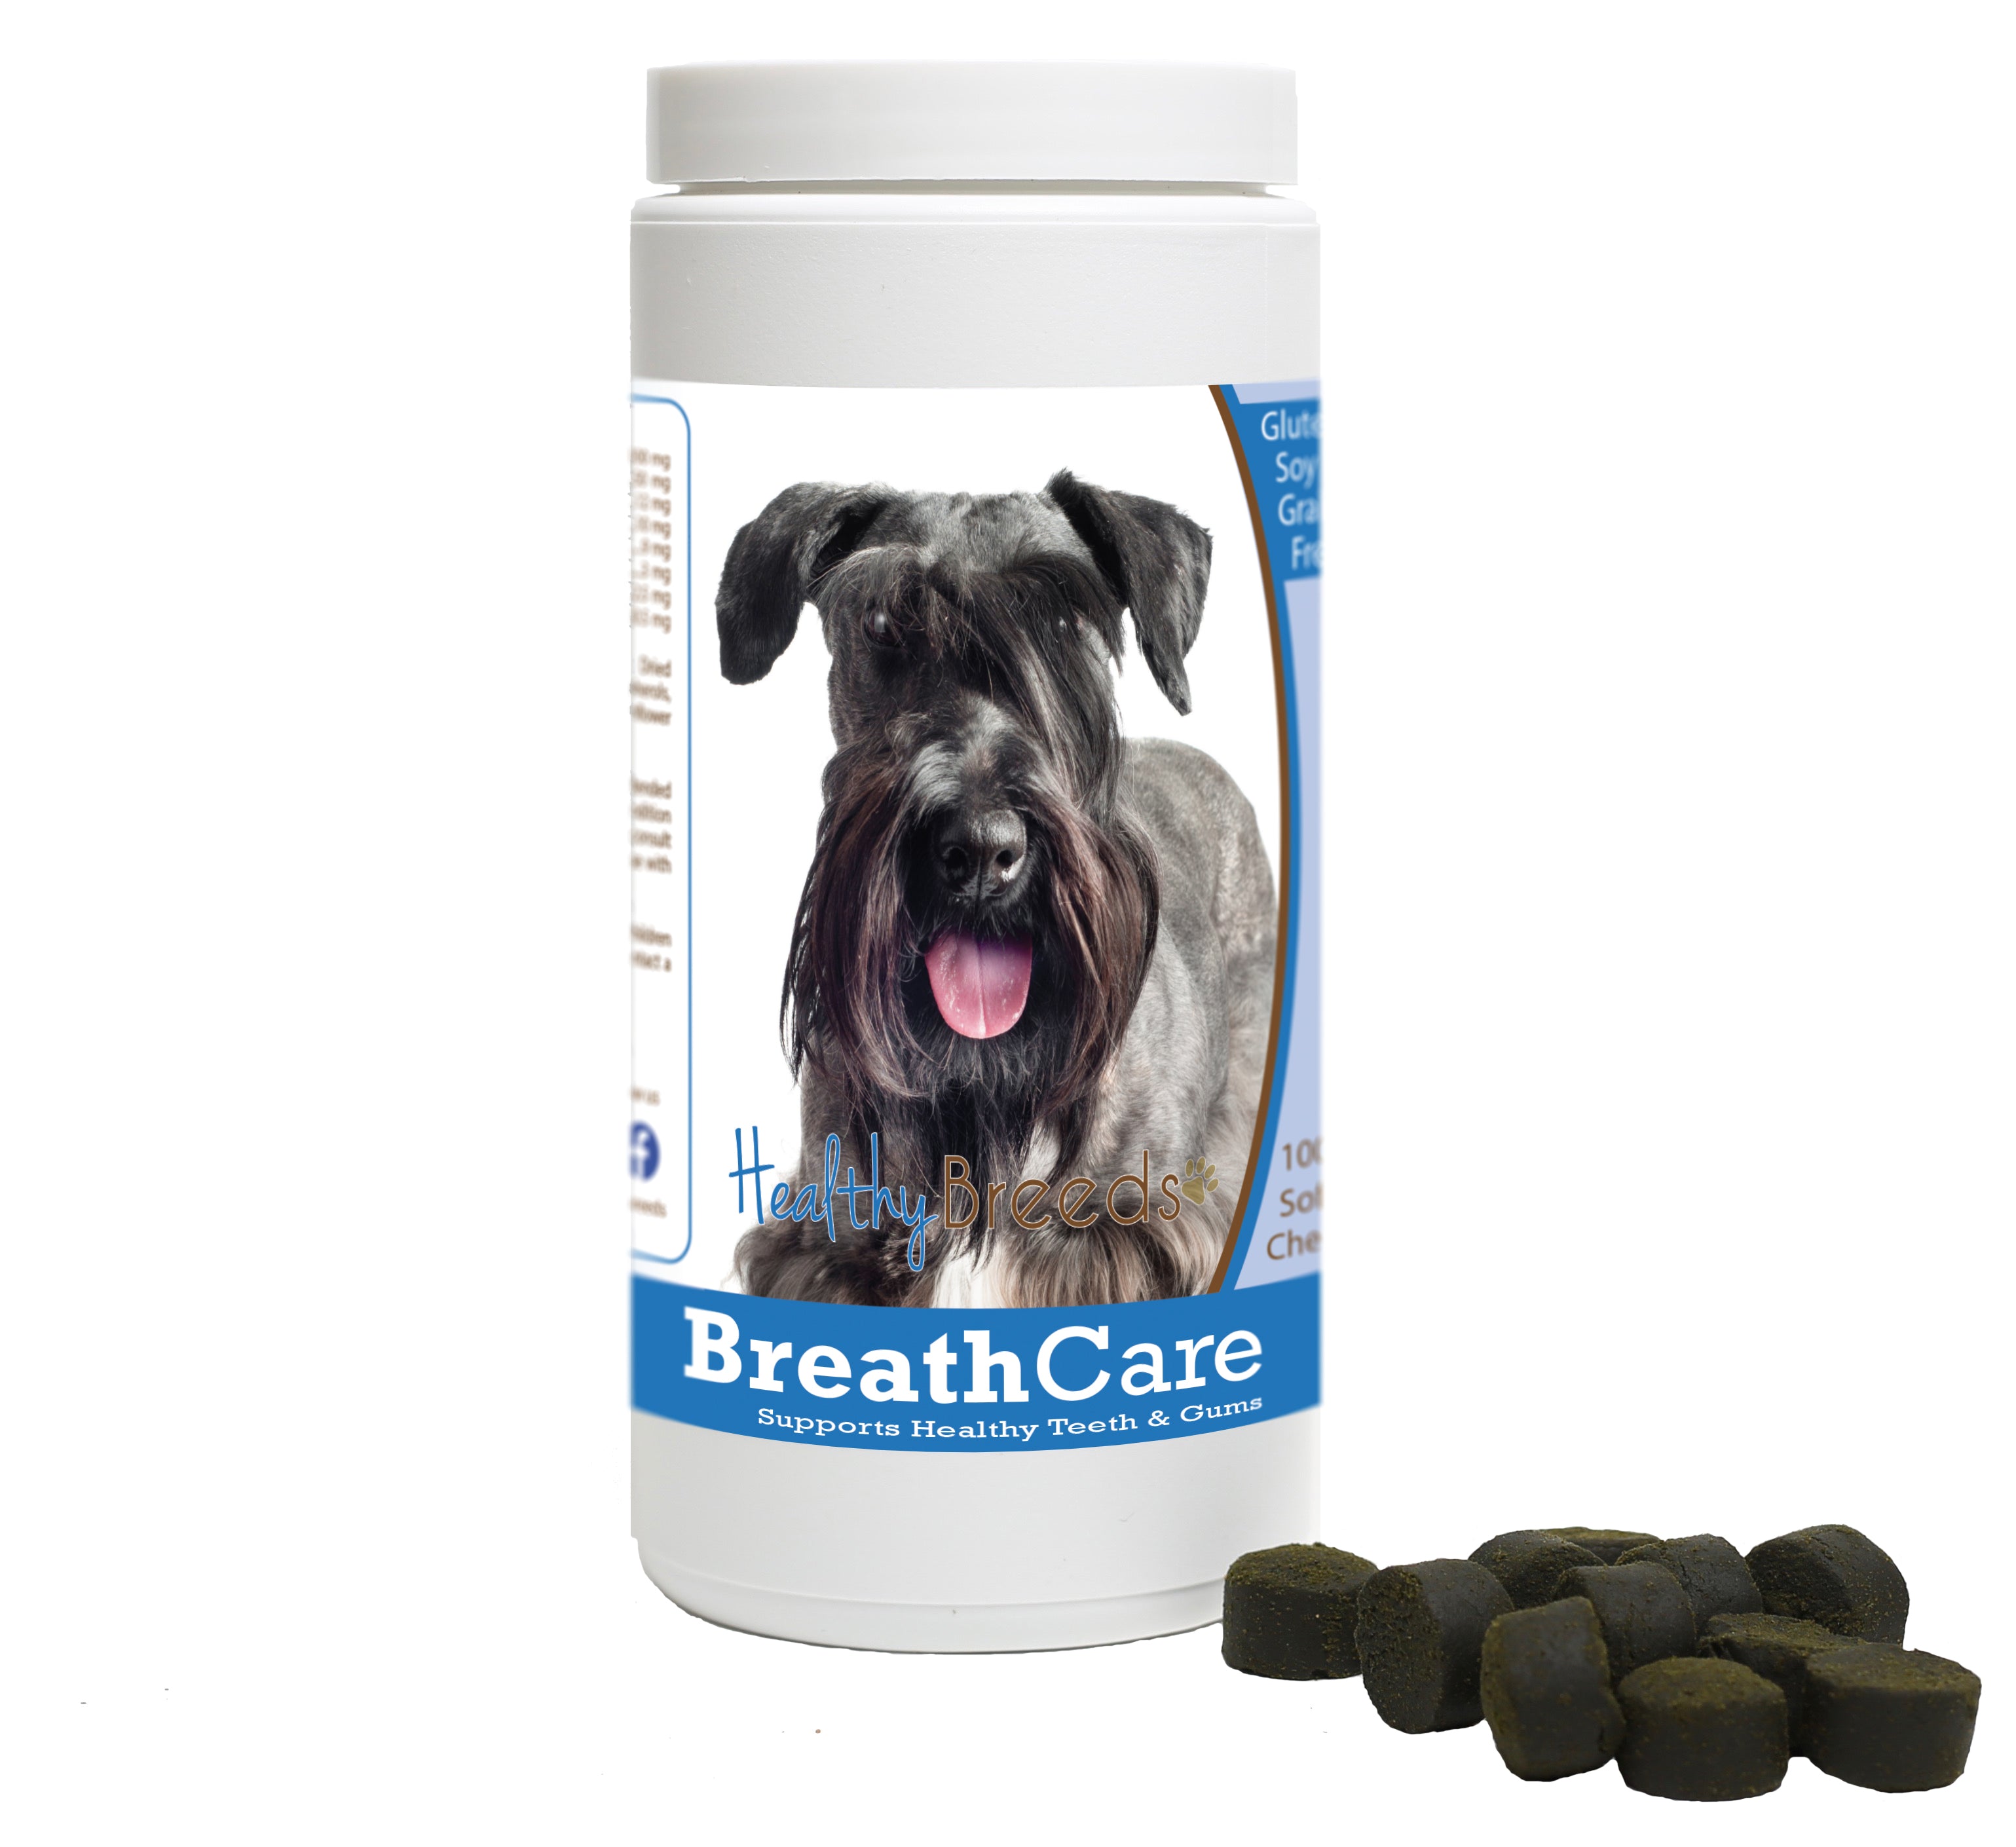 Cesky Terrier Breath Care Soft Chews for Dogs 100 Count